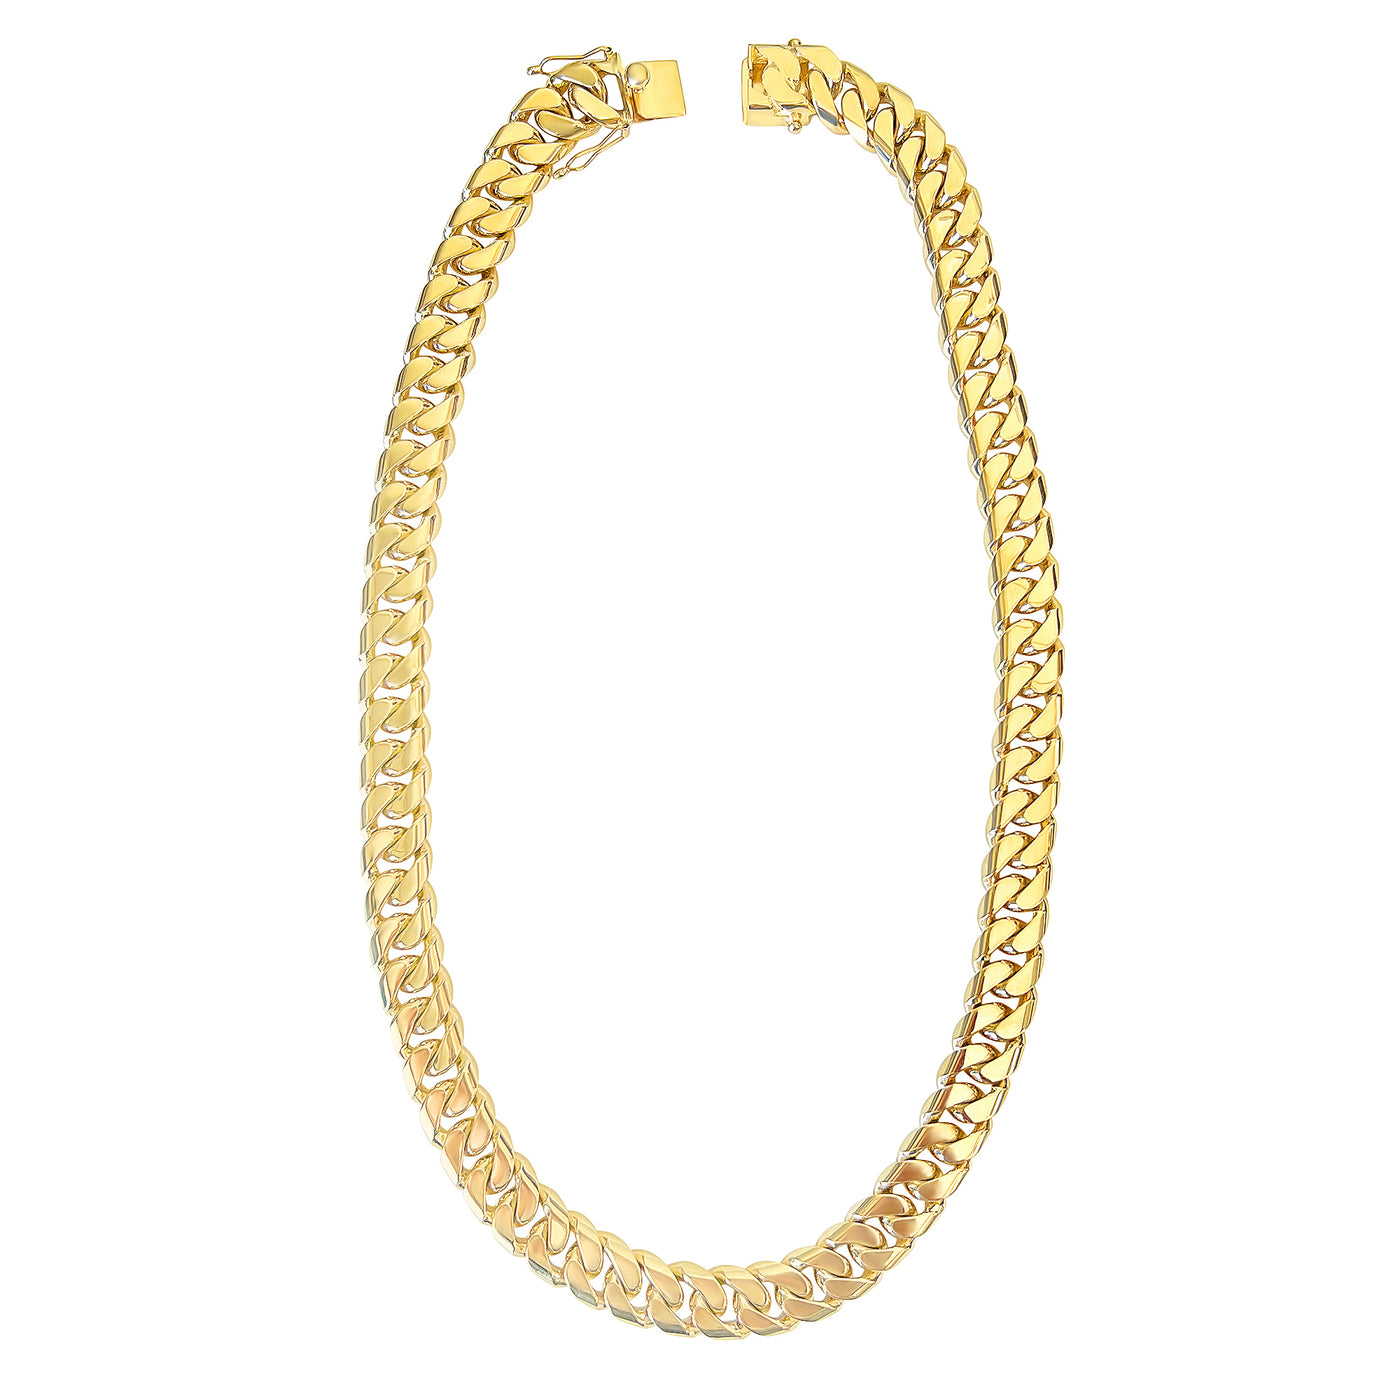 Men's Cuban Link Chain Necklace Box Clasp Safety Lock 14K Gold Plated  8 mm / 26"